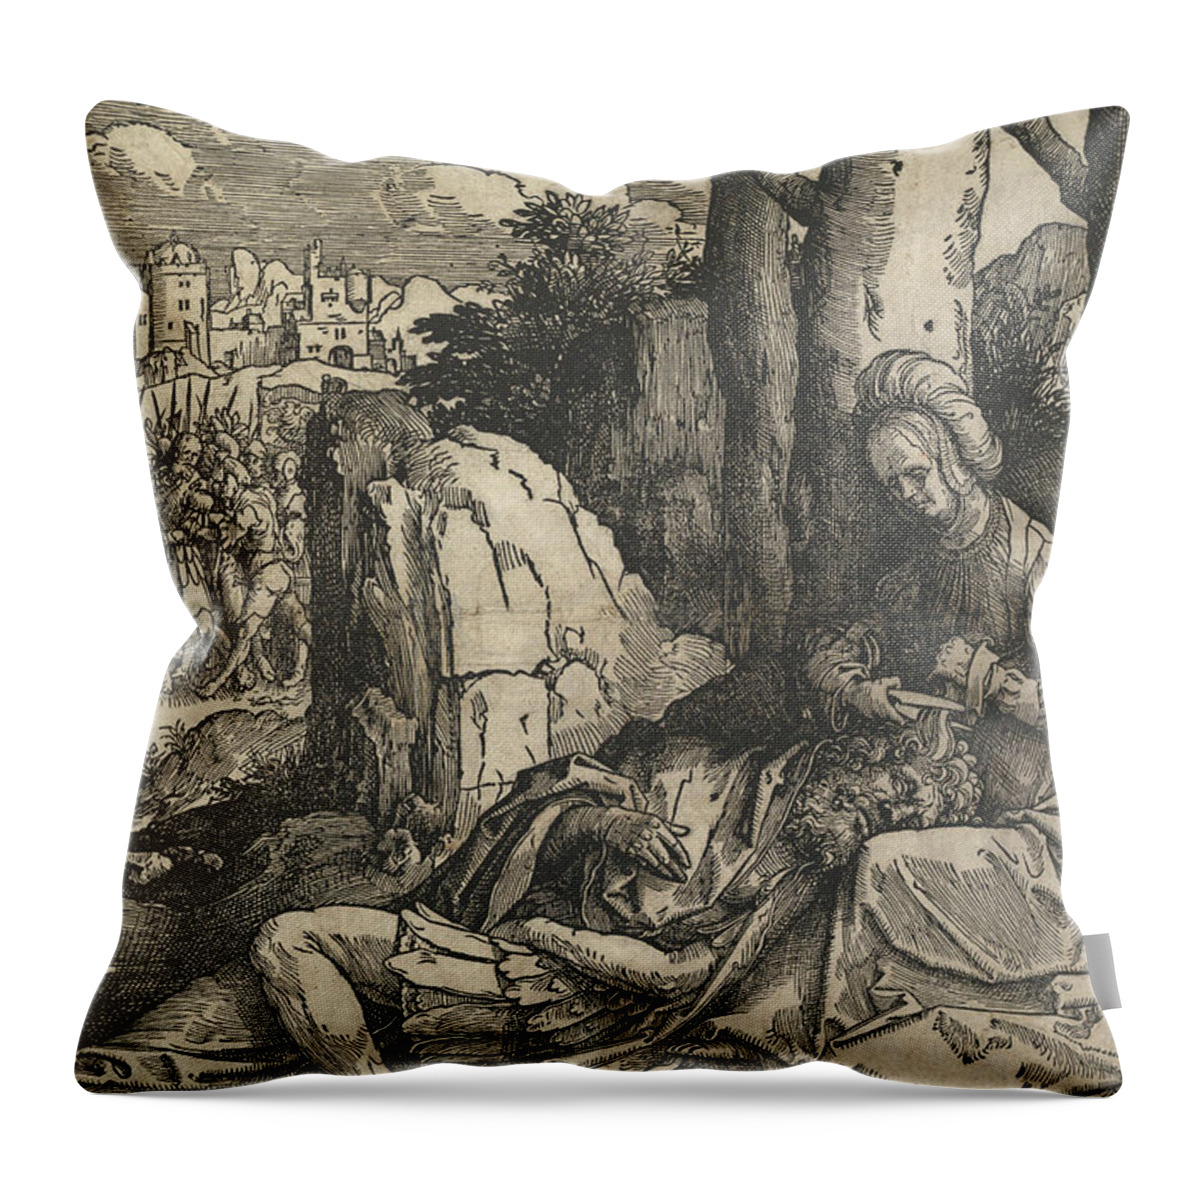 16th Century Art Throw Pillow featuring the relief Samson and Delilah by Lucas van Leyden